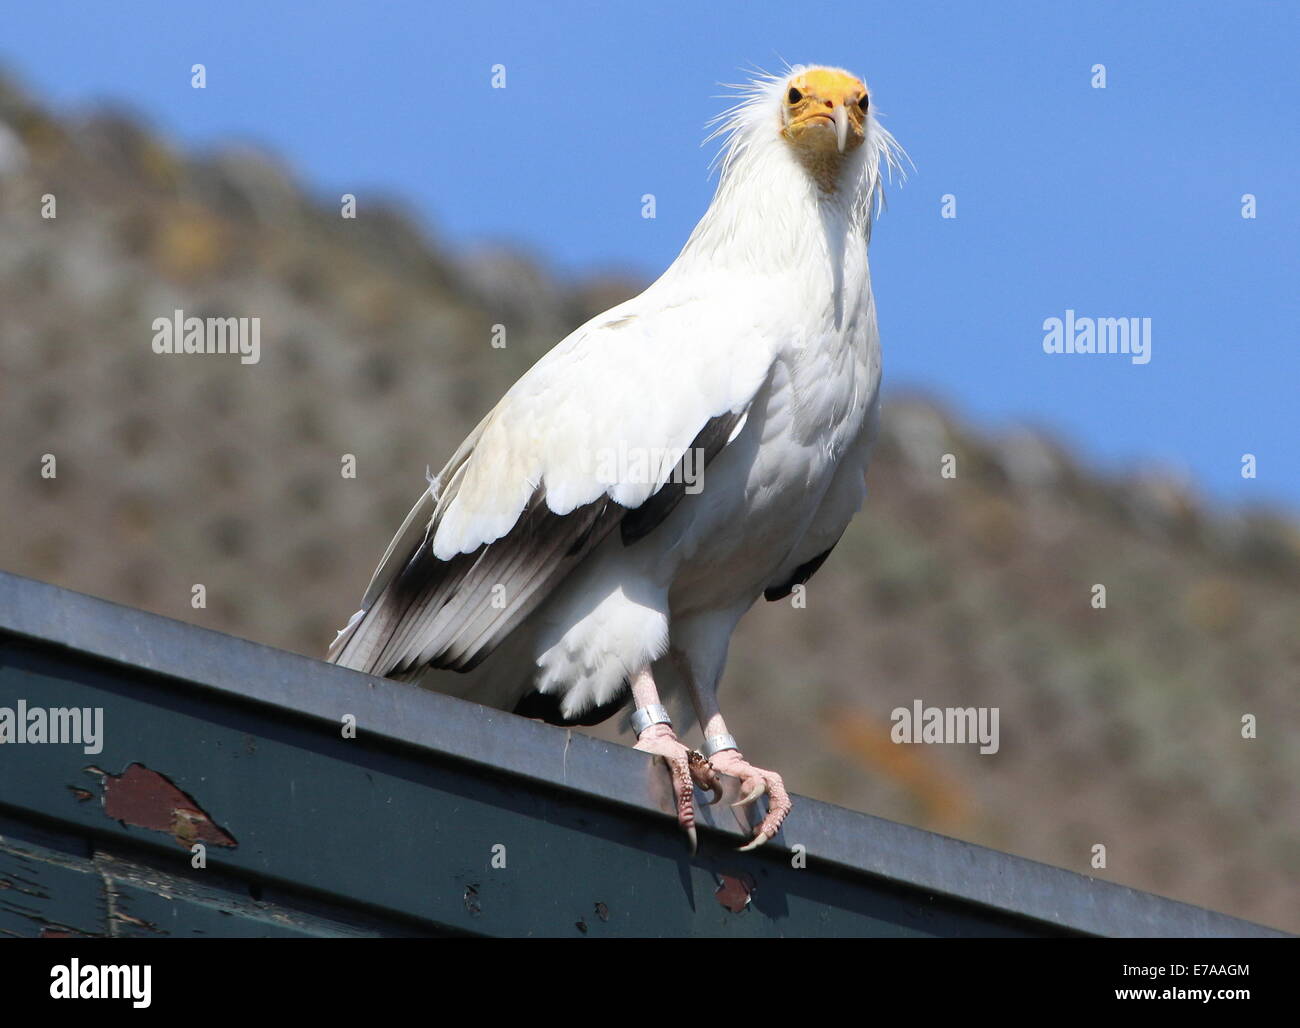 Egyptian vulture or white scavenger vulture (Neophron percnopterus) posing on a rooftop during a raptor show Stock Photo